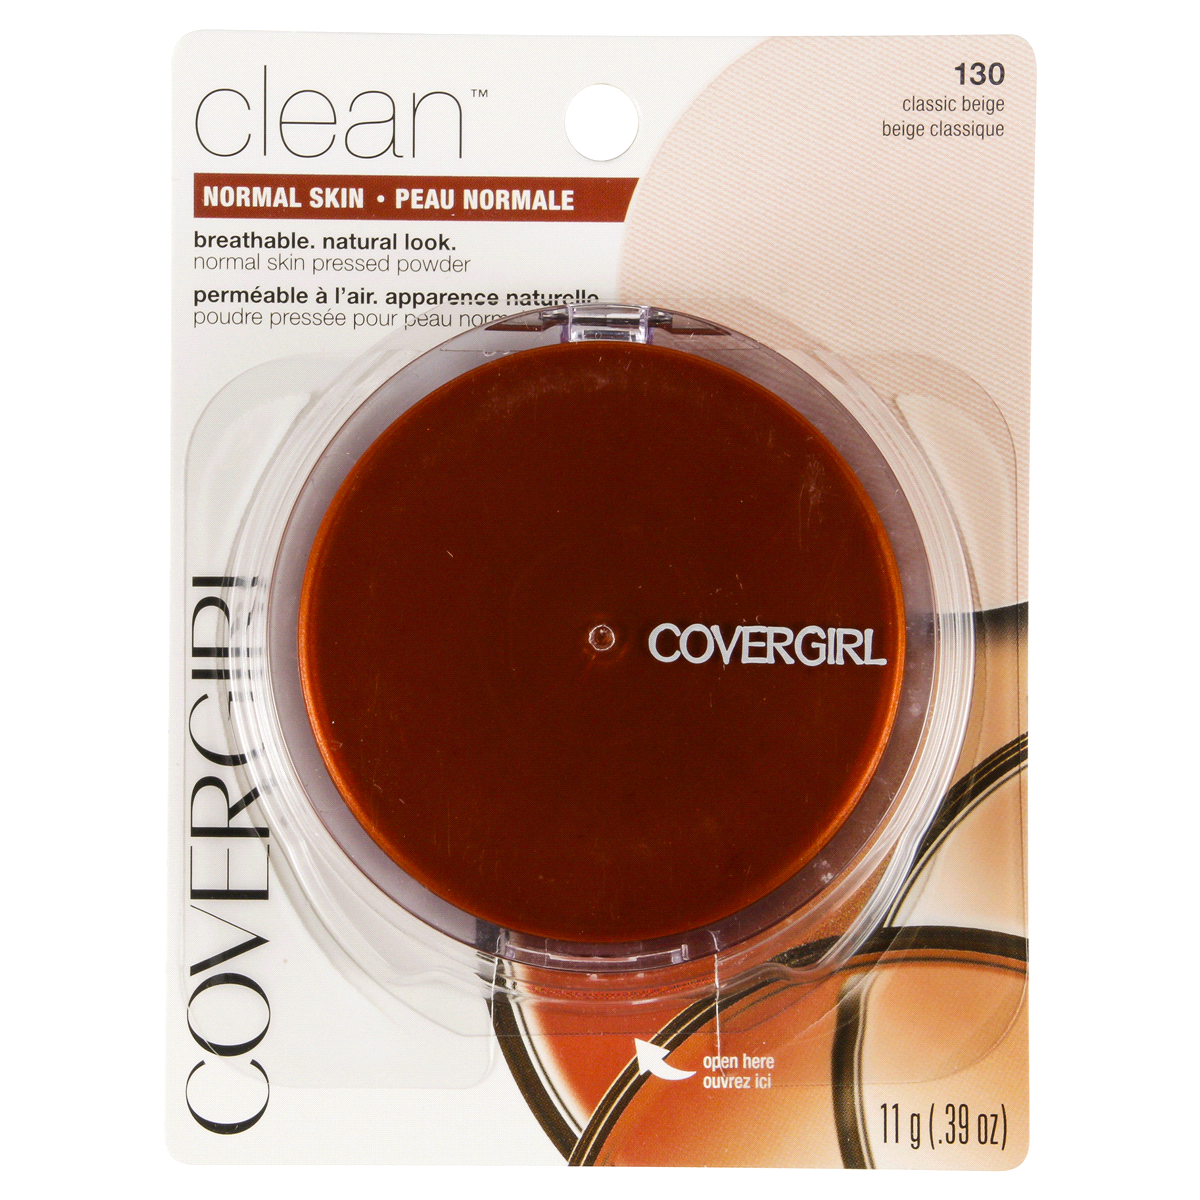 slide 2 of 7, Covergirl COVERGIRL Clean Pressed Powder Classic Beige 130, 11 G 0.39 OZ, 1 ct